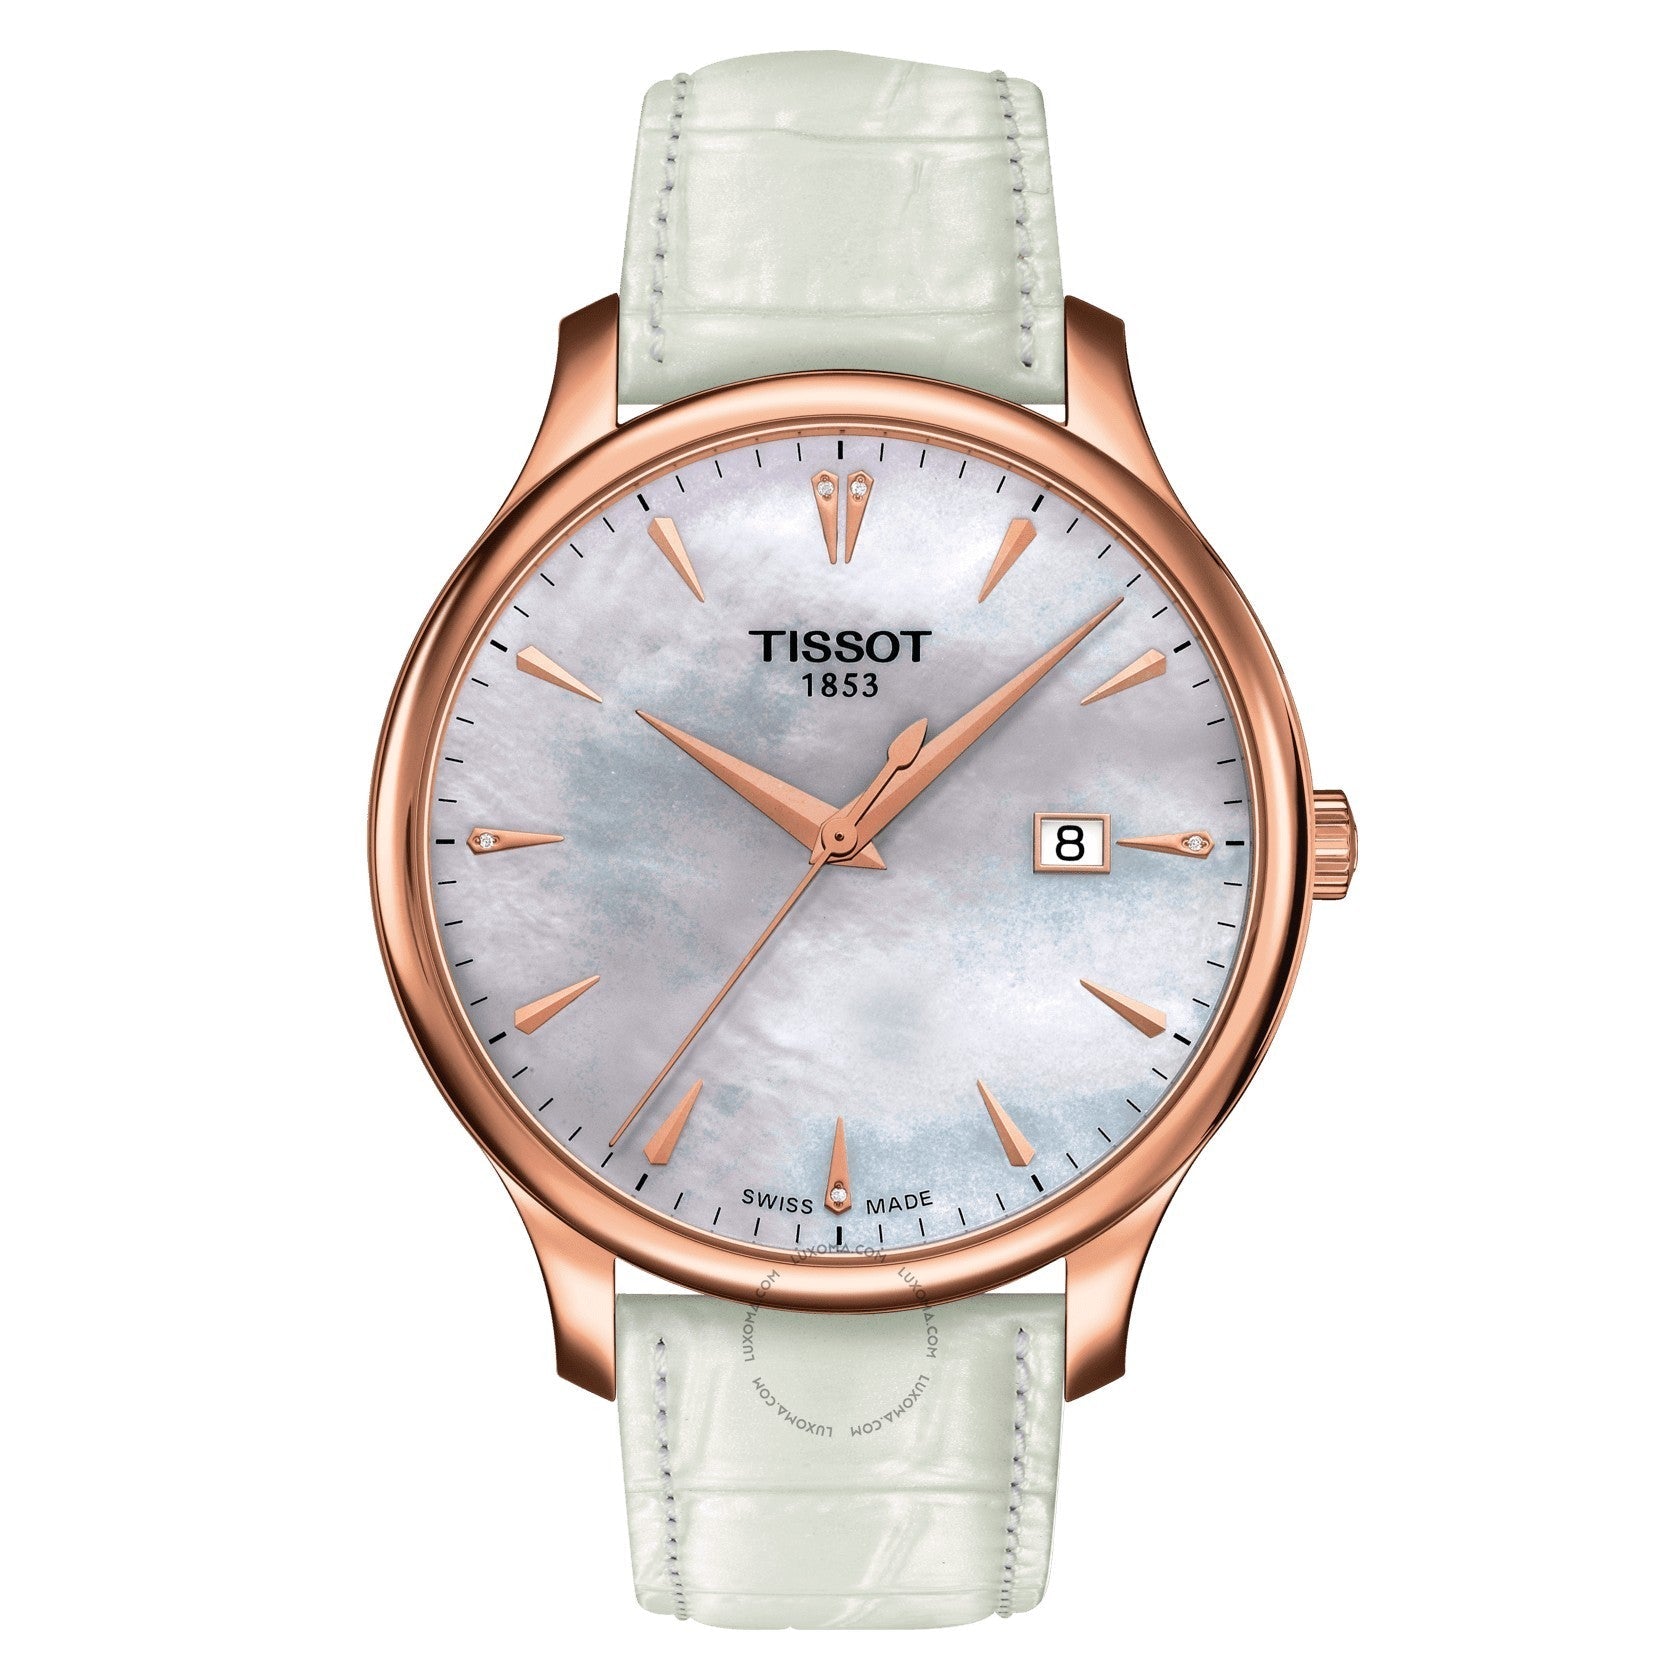 Tissot Tradition Quartz White Mother of Pearl Dial Ladies Watch T063.610.36.116.01